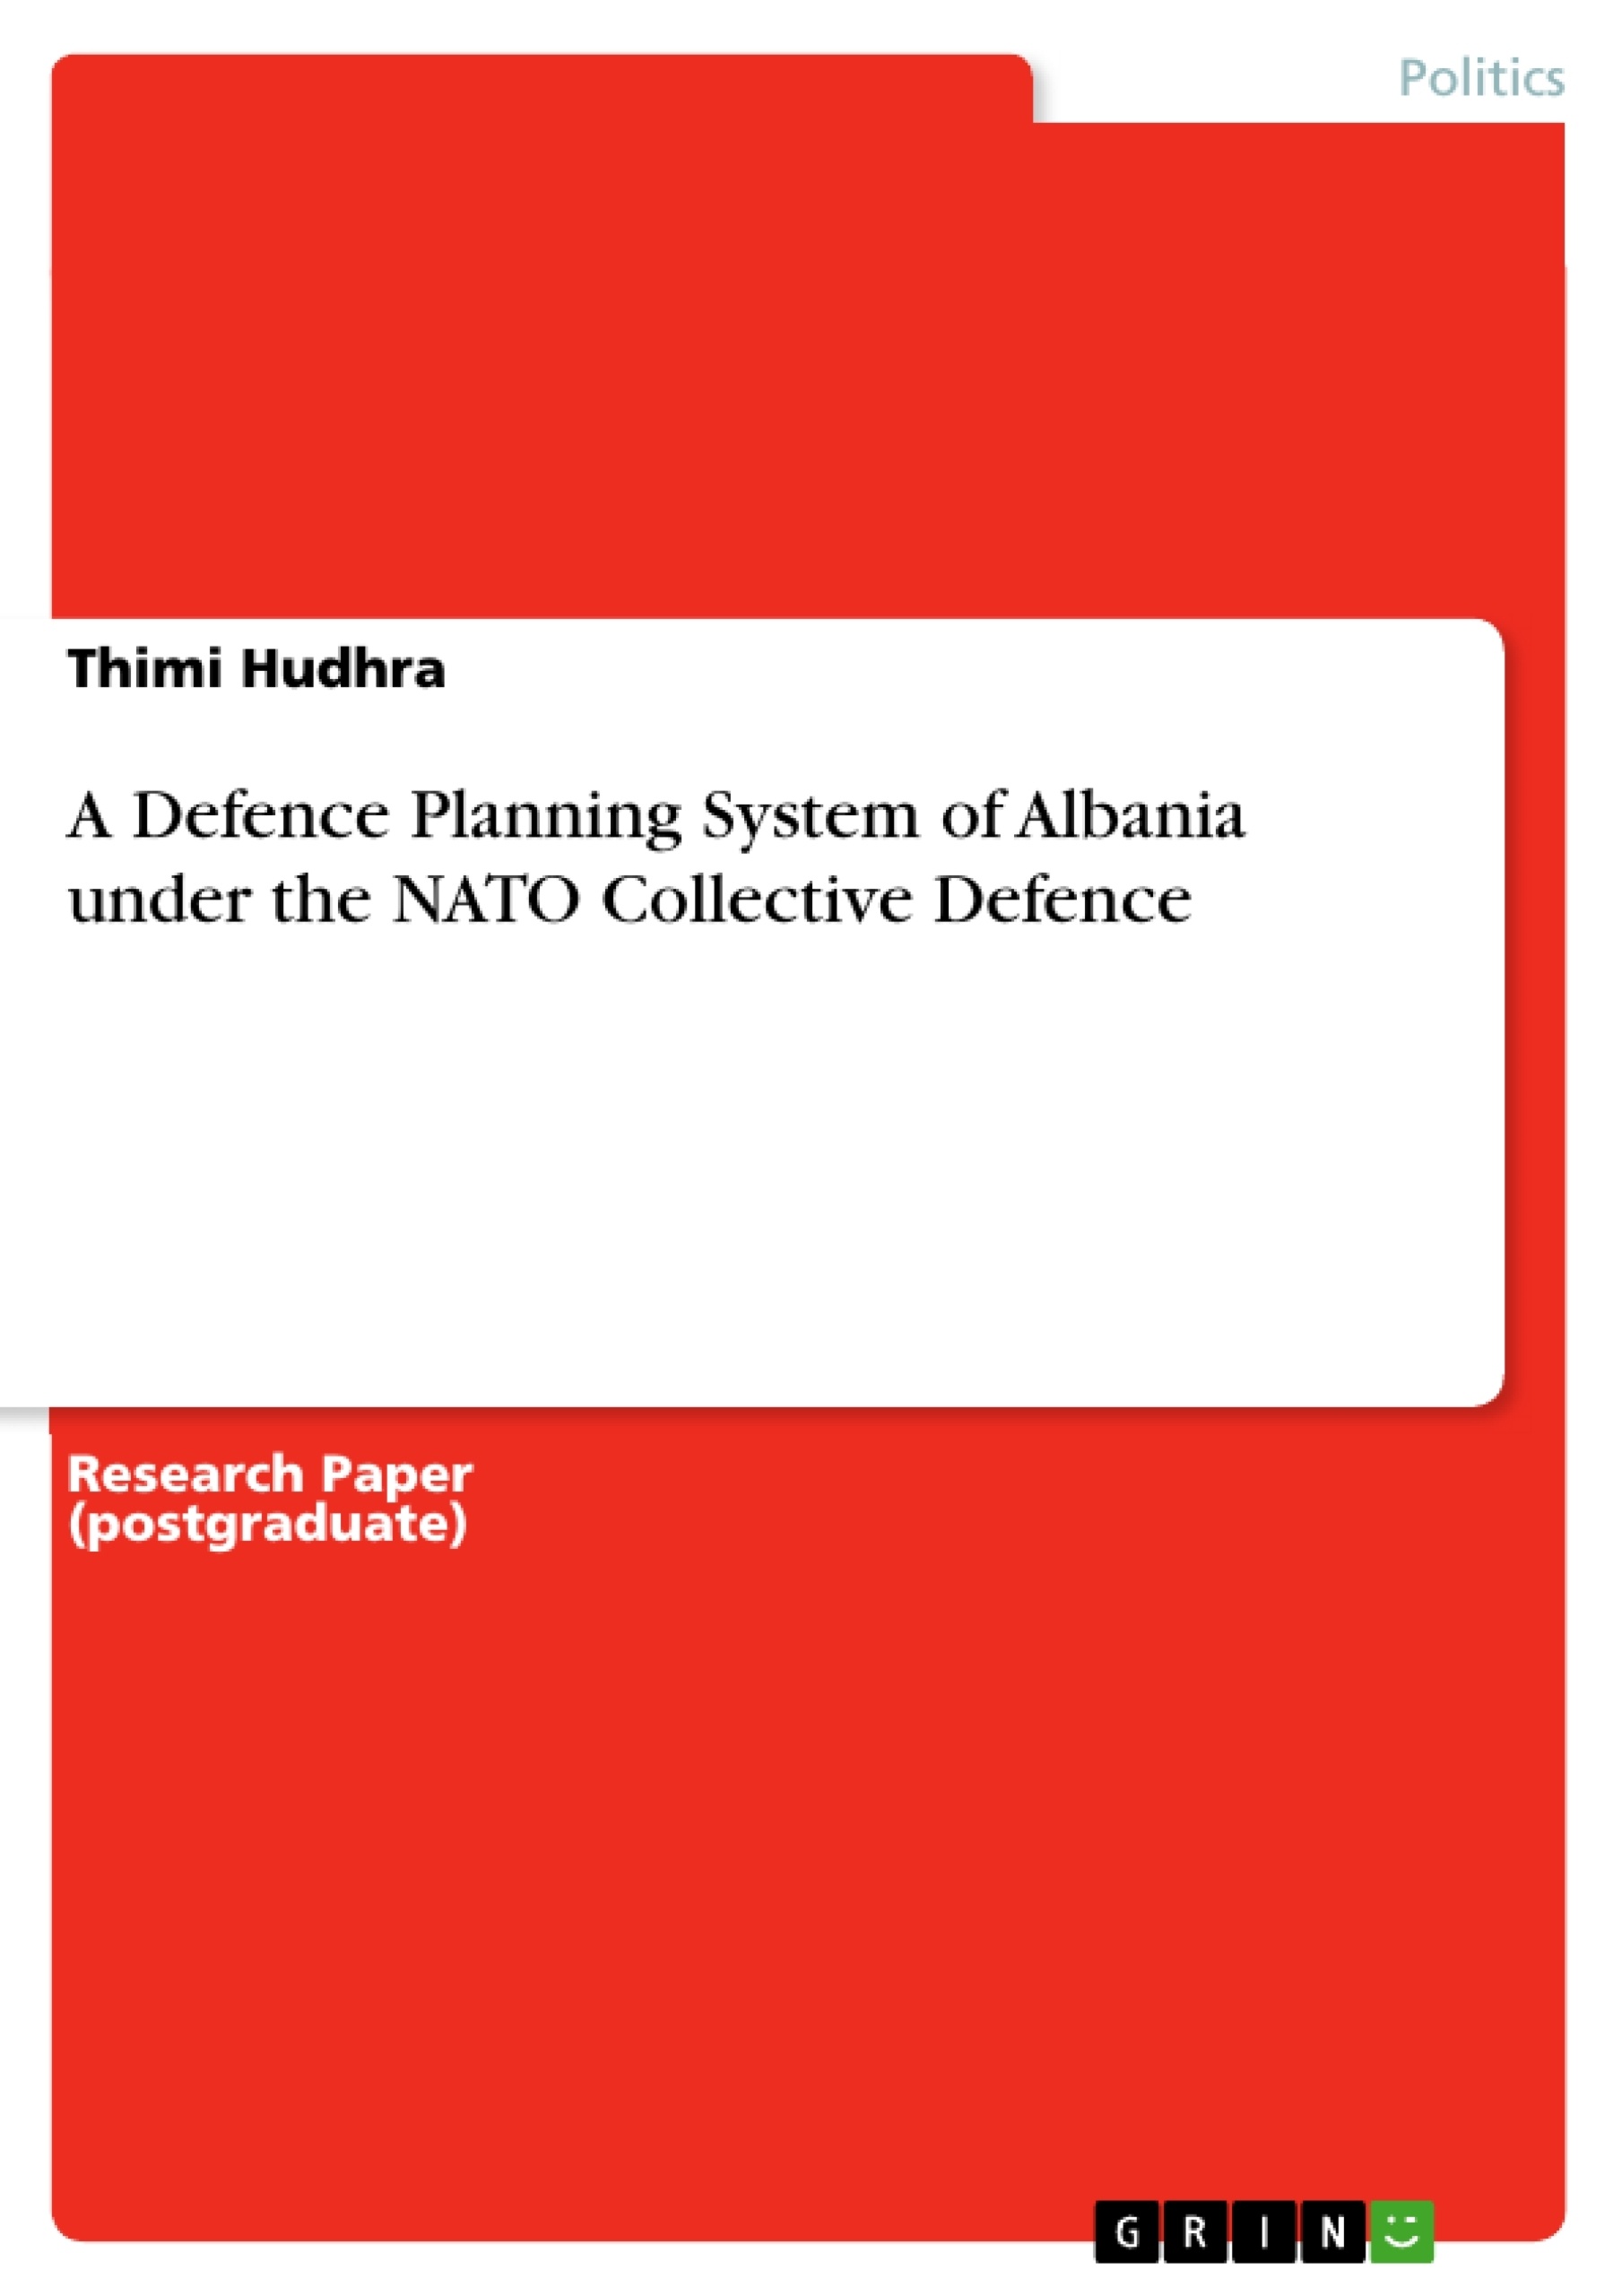 Título: A Defence Planning System of Albania under the NATO Collective Defence